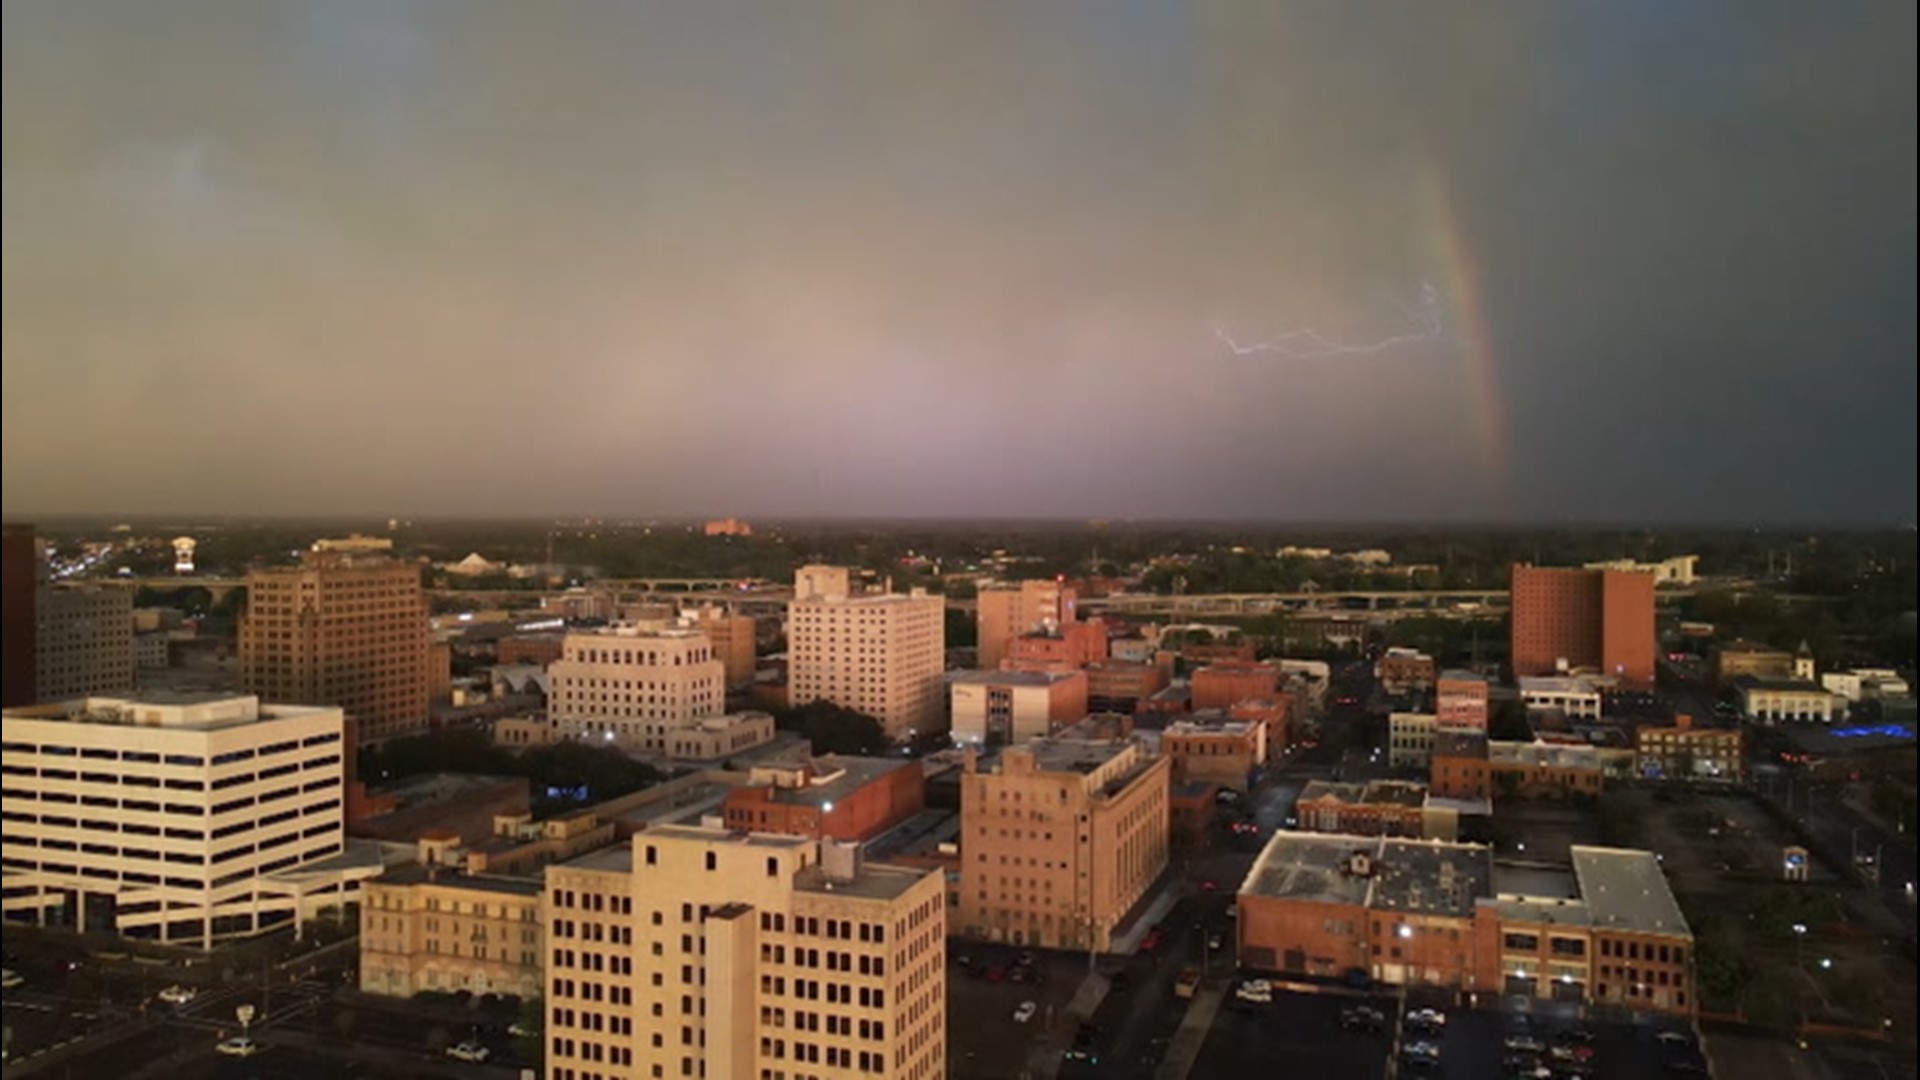 Drone footage captured lightning streaking across the sky behind a rainbow above the Shreveport skyline in Louisiana, on April 9, as a storm rolled through the area.